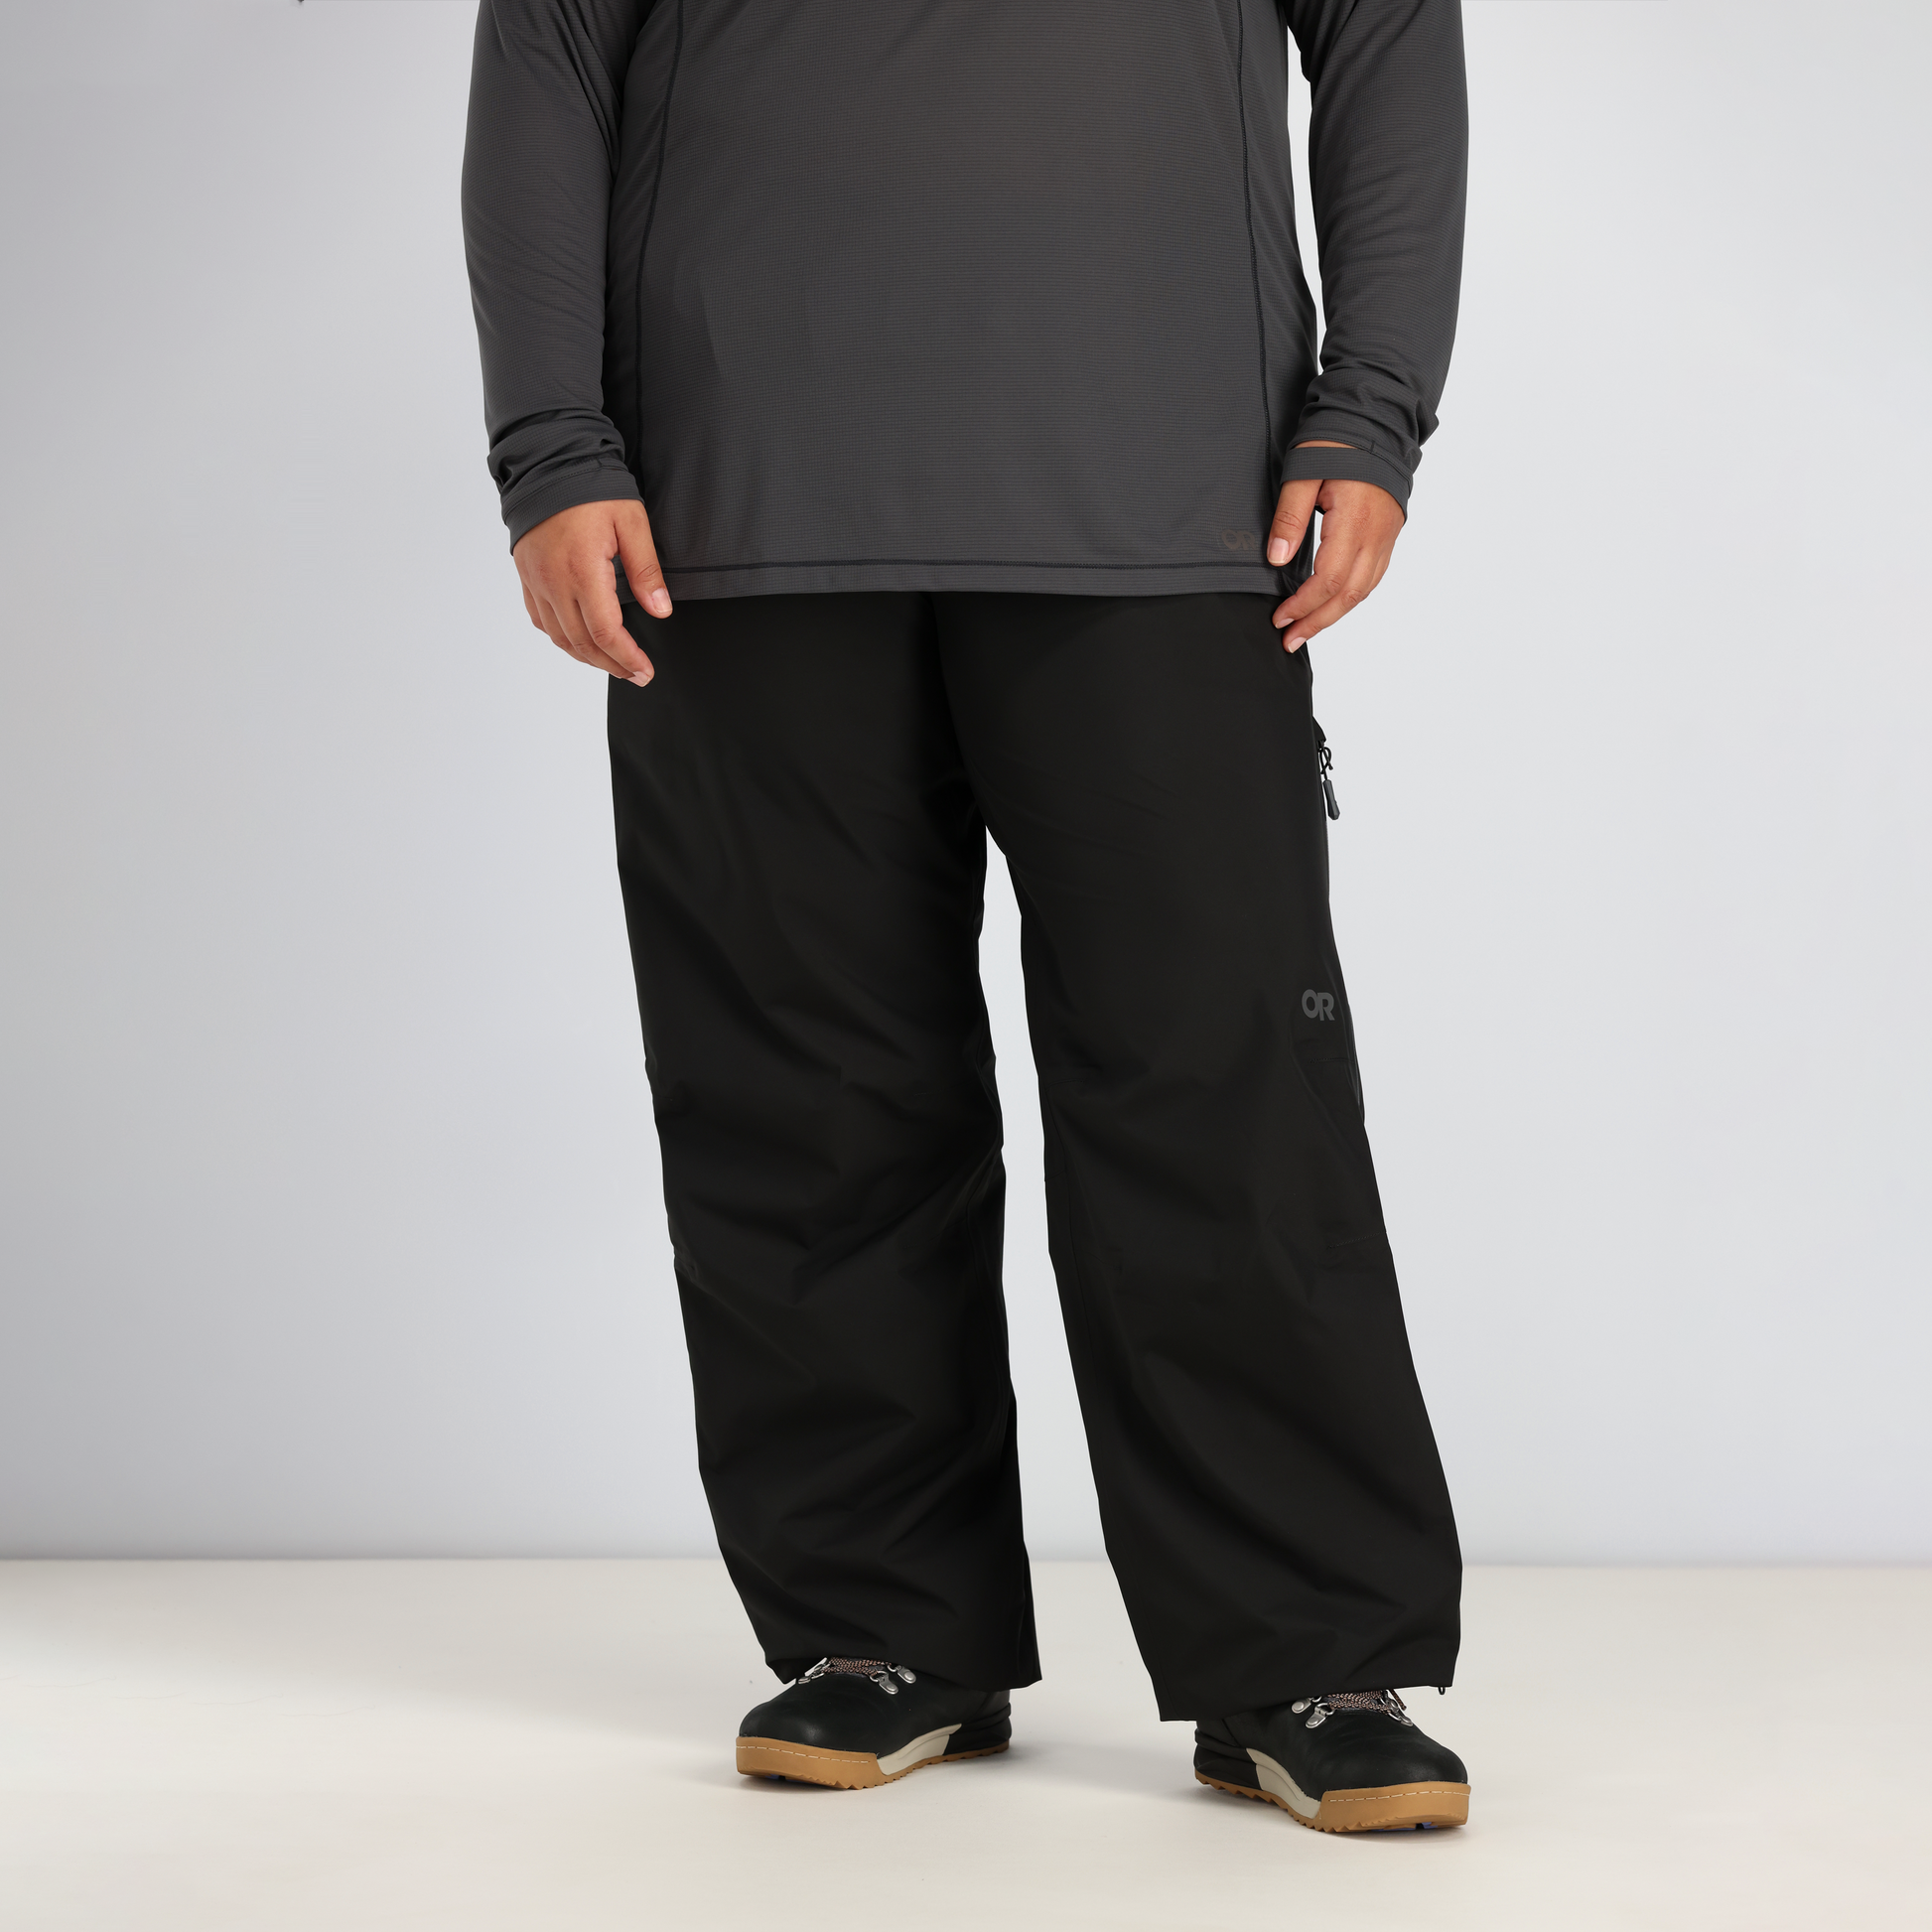 Plus Size Womens Waterproof & Breathable Outdoor Pants